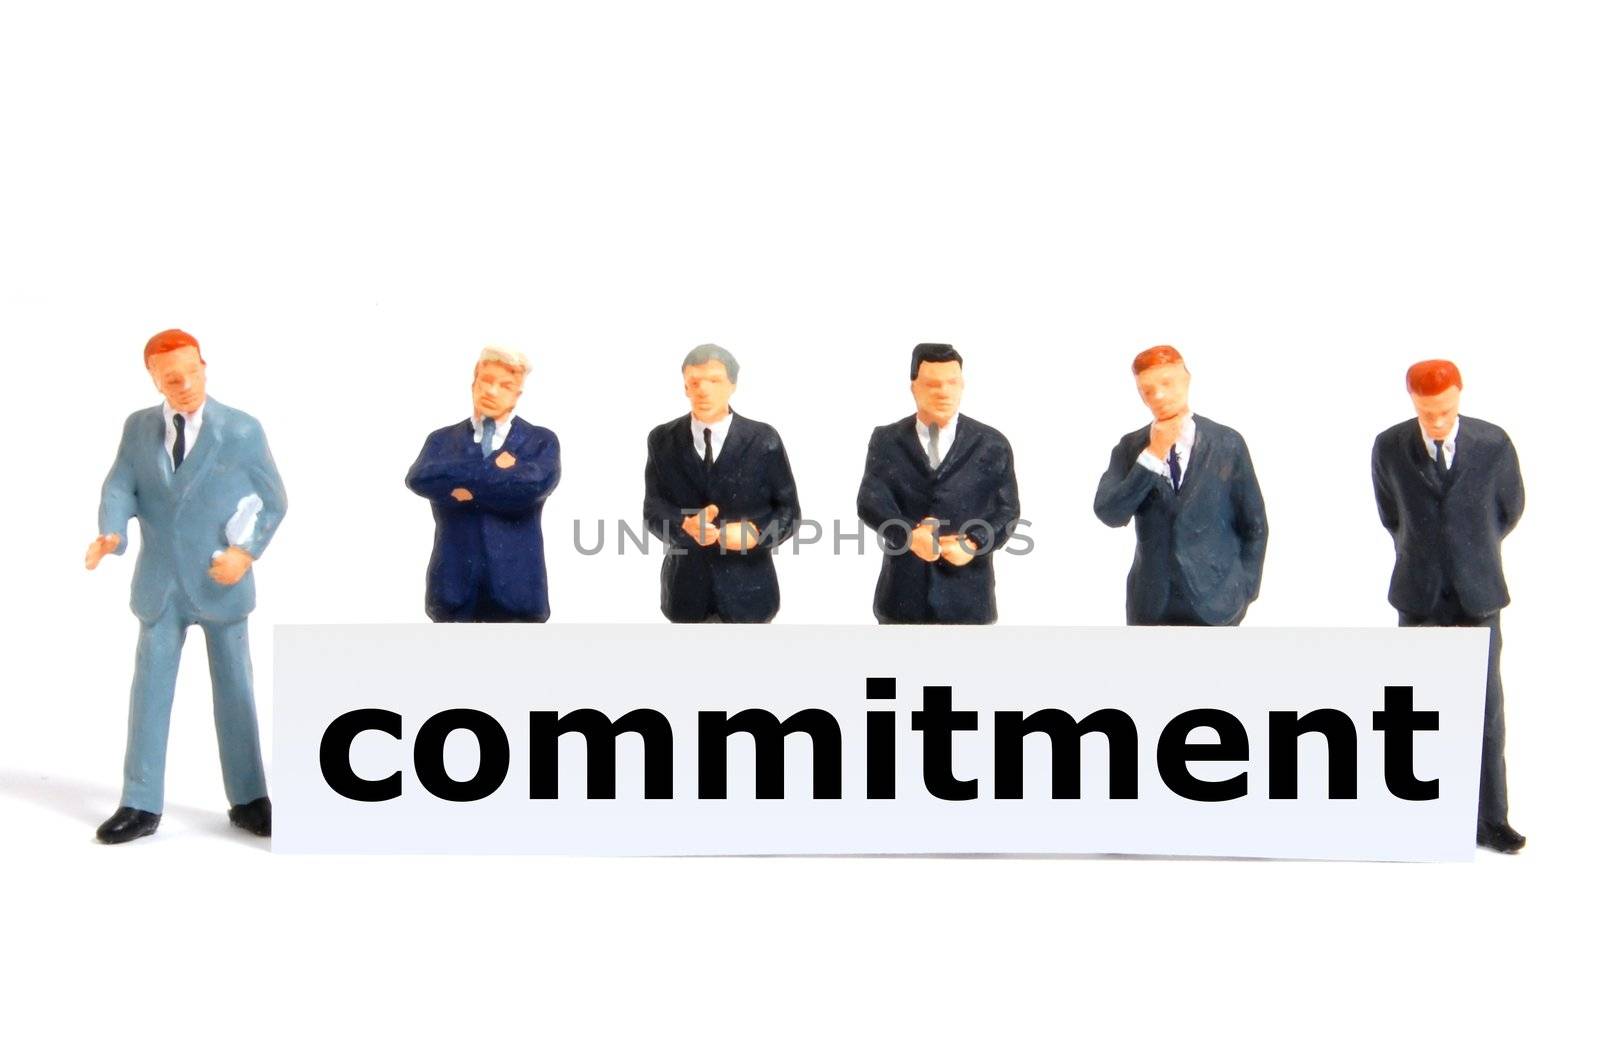 business commitment by gunnar3000